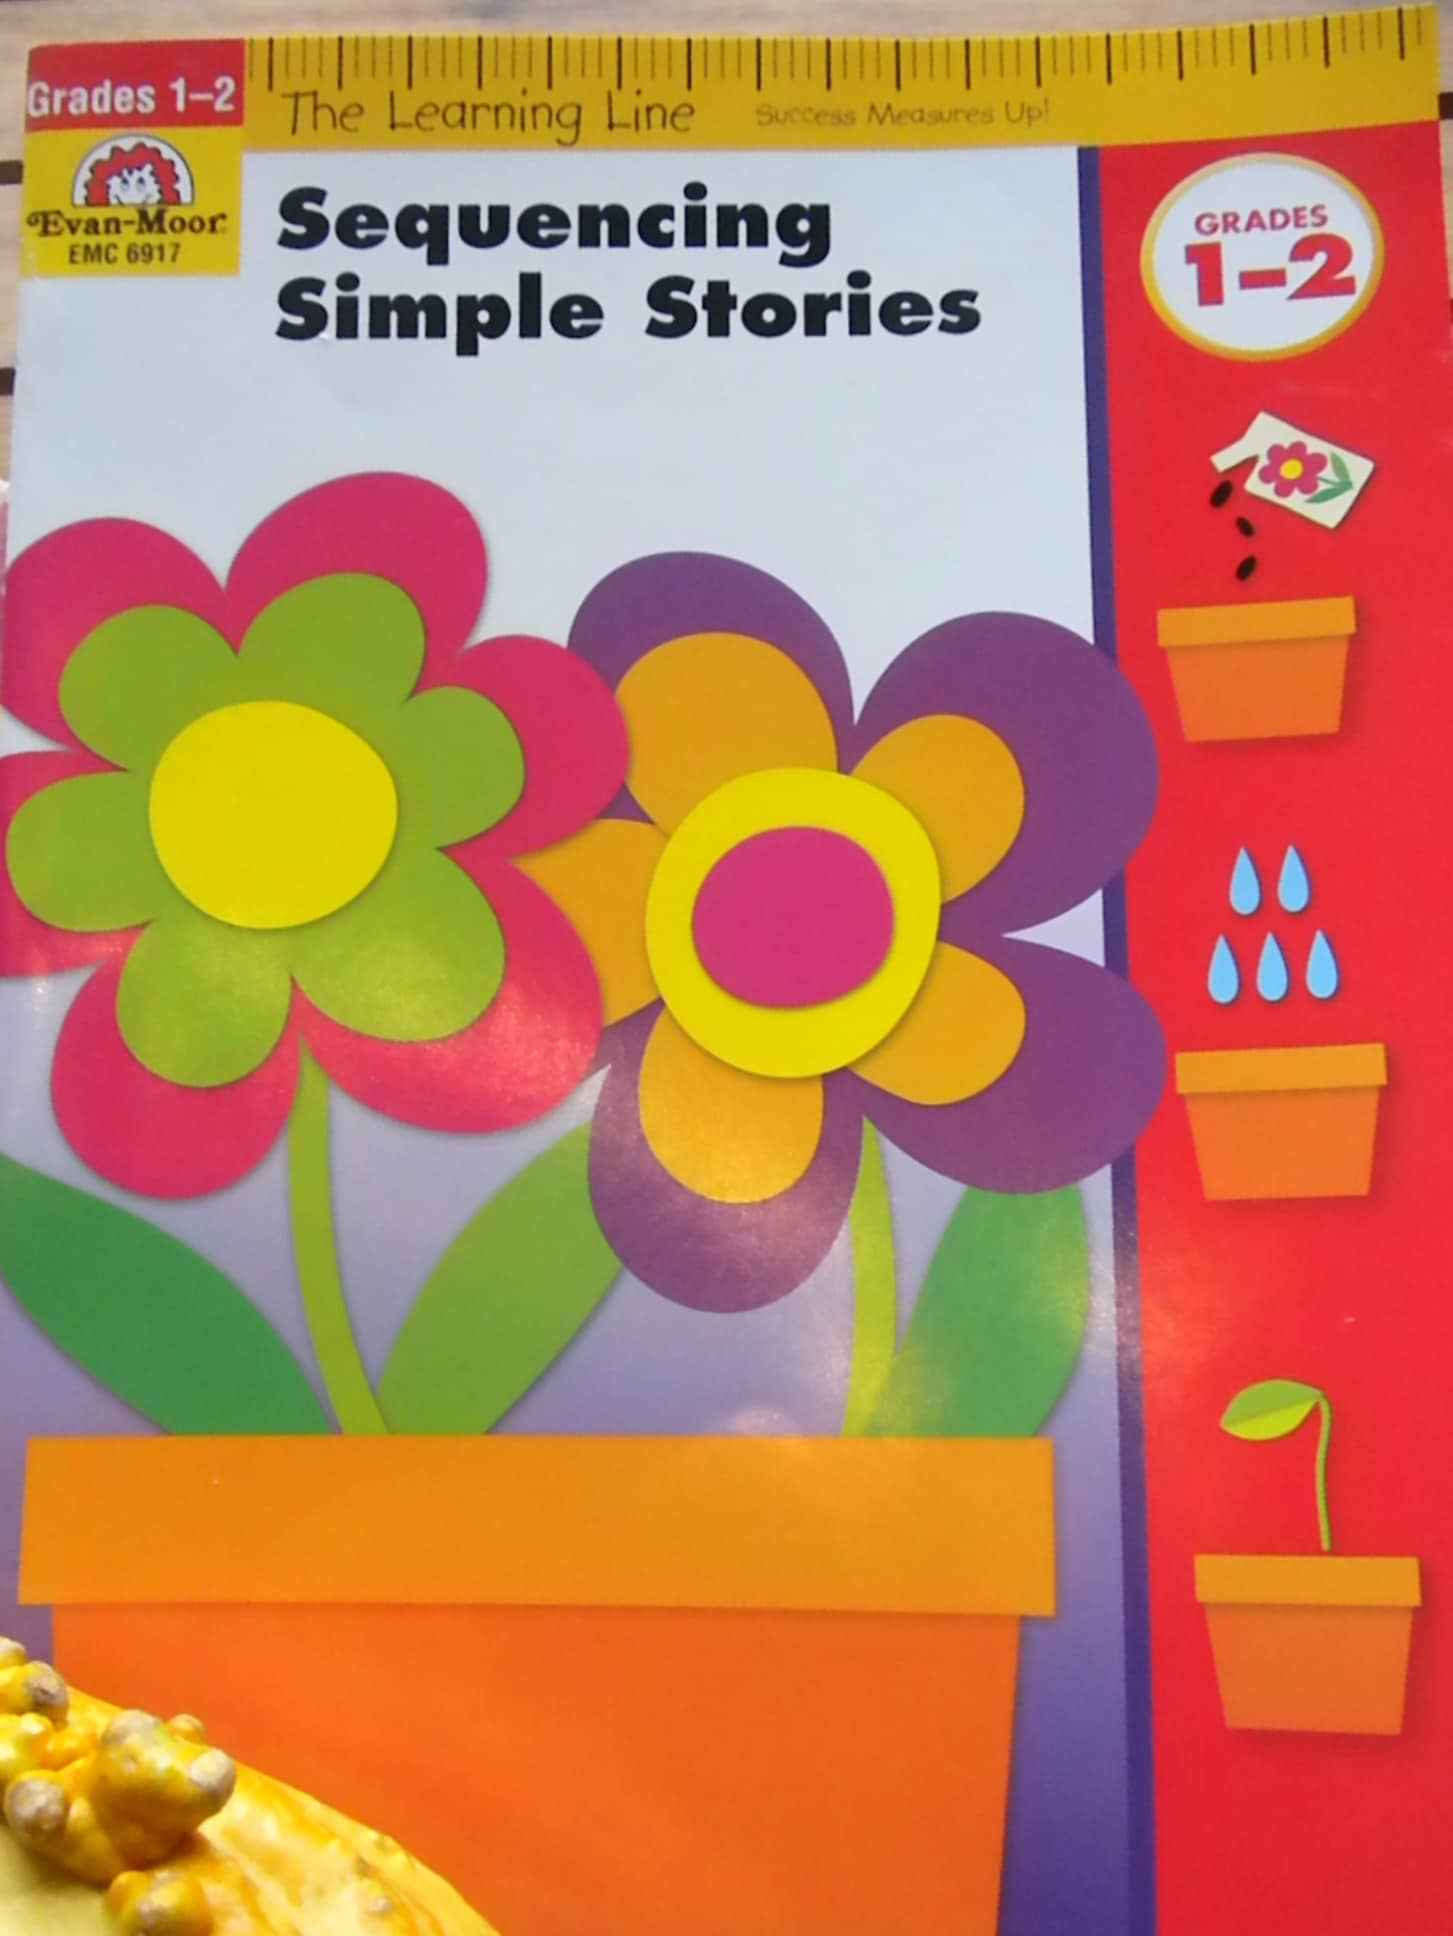 Sequencing Simple Stories AND Story Writing Activities